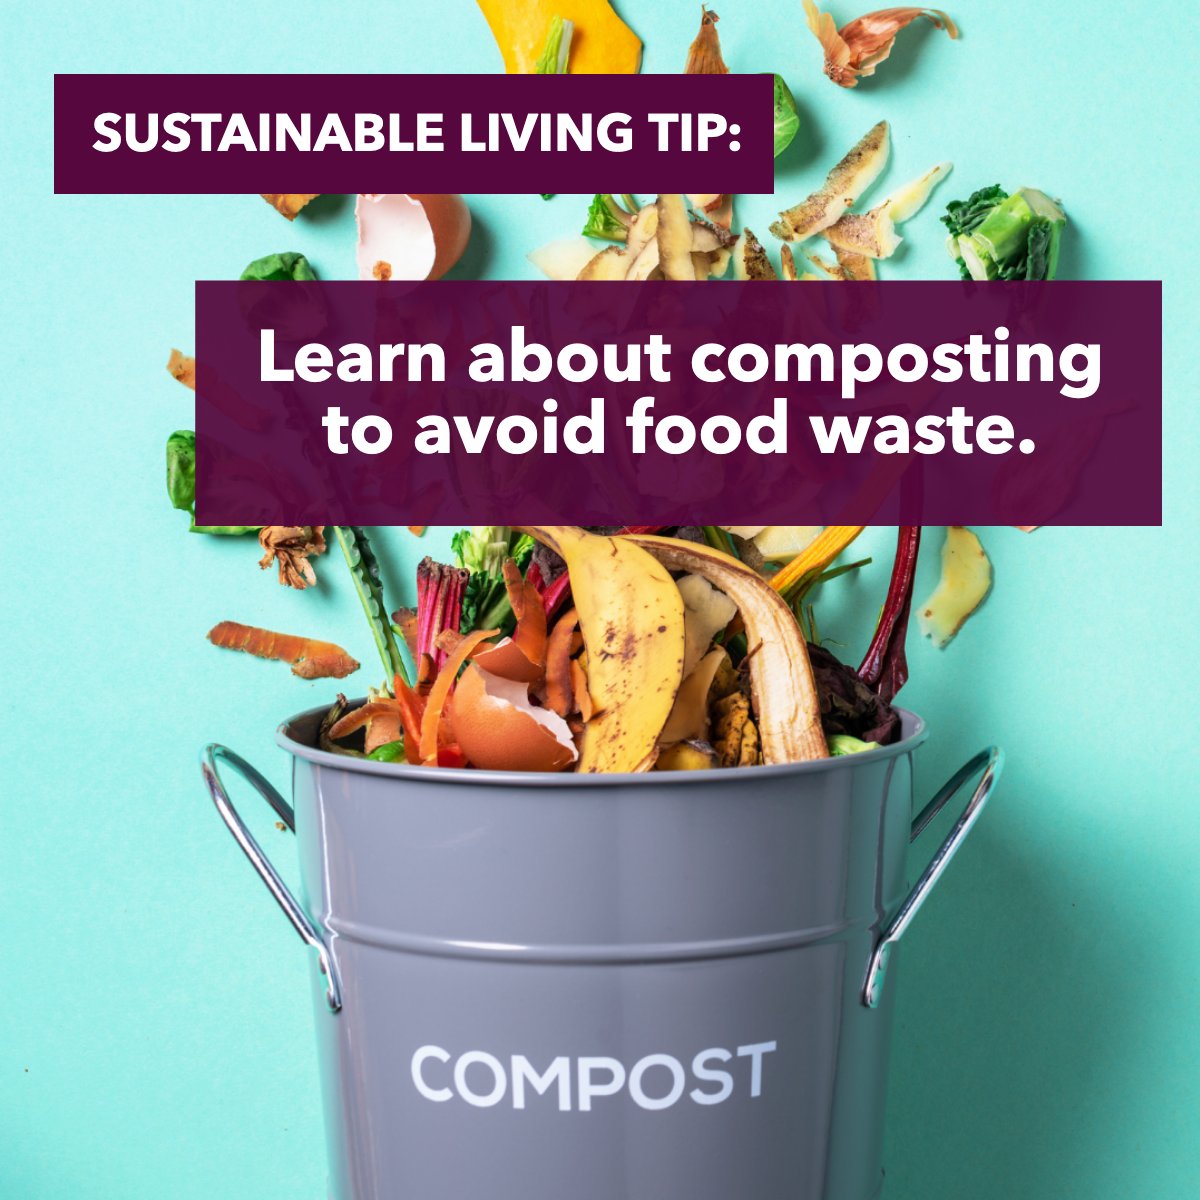 Have you tried composting? Tell me your experience in the comments! 💭

#sustainablelifestyle    #sustainable    #sustainablity    #composting
#RogueValley #SouthernOregon #RealEstate